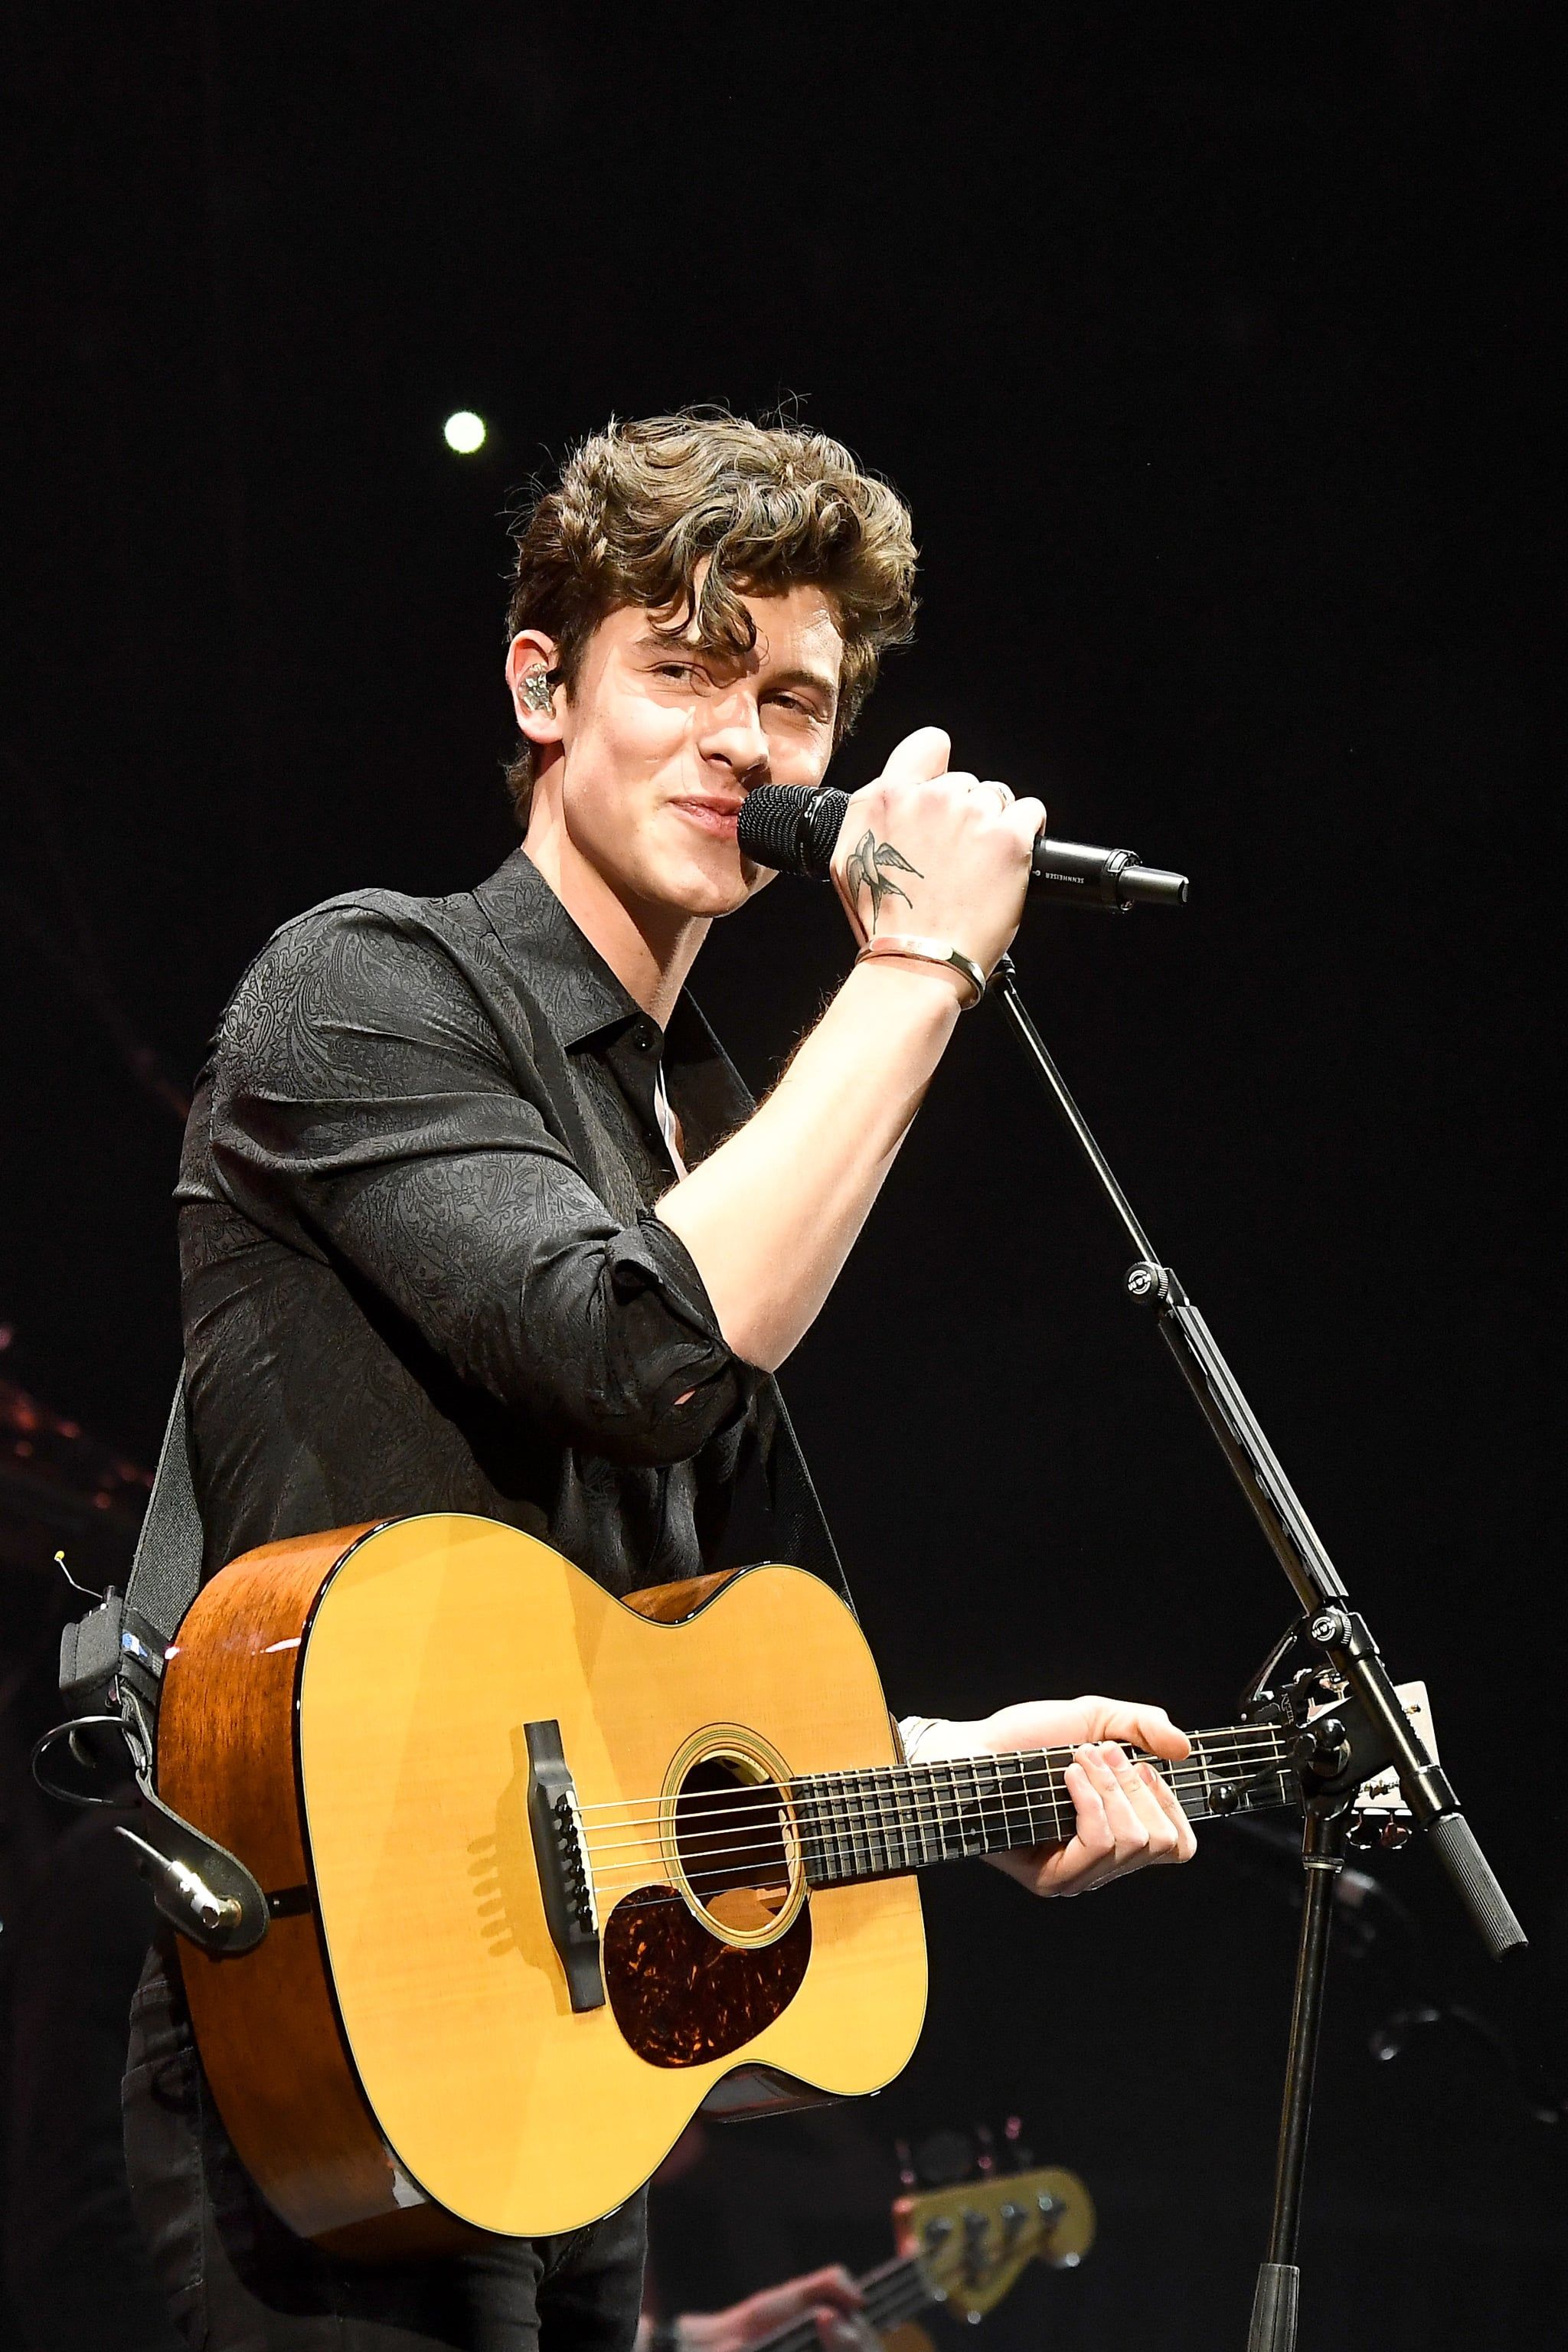 Shawn Mendes performs on stage at the 2019 Jingle Ball Tour - Shawn Mendes